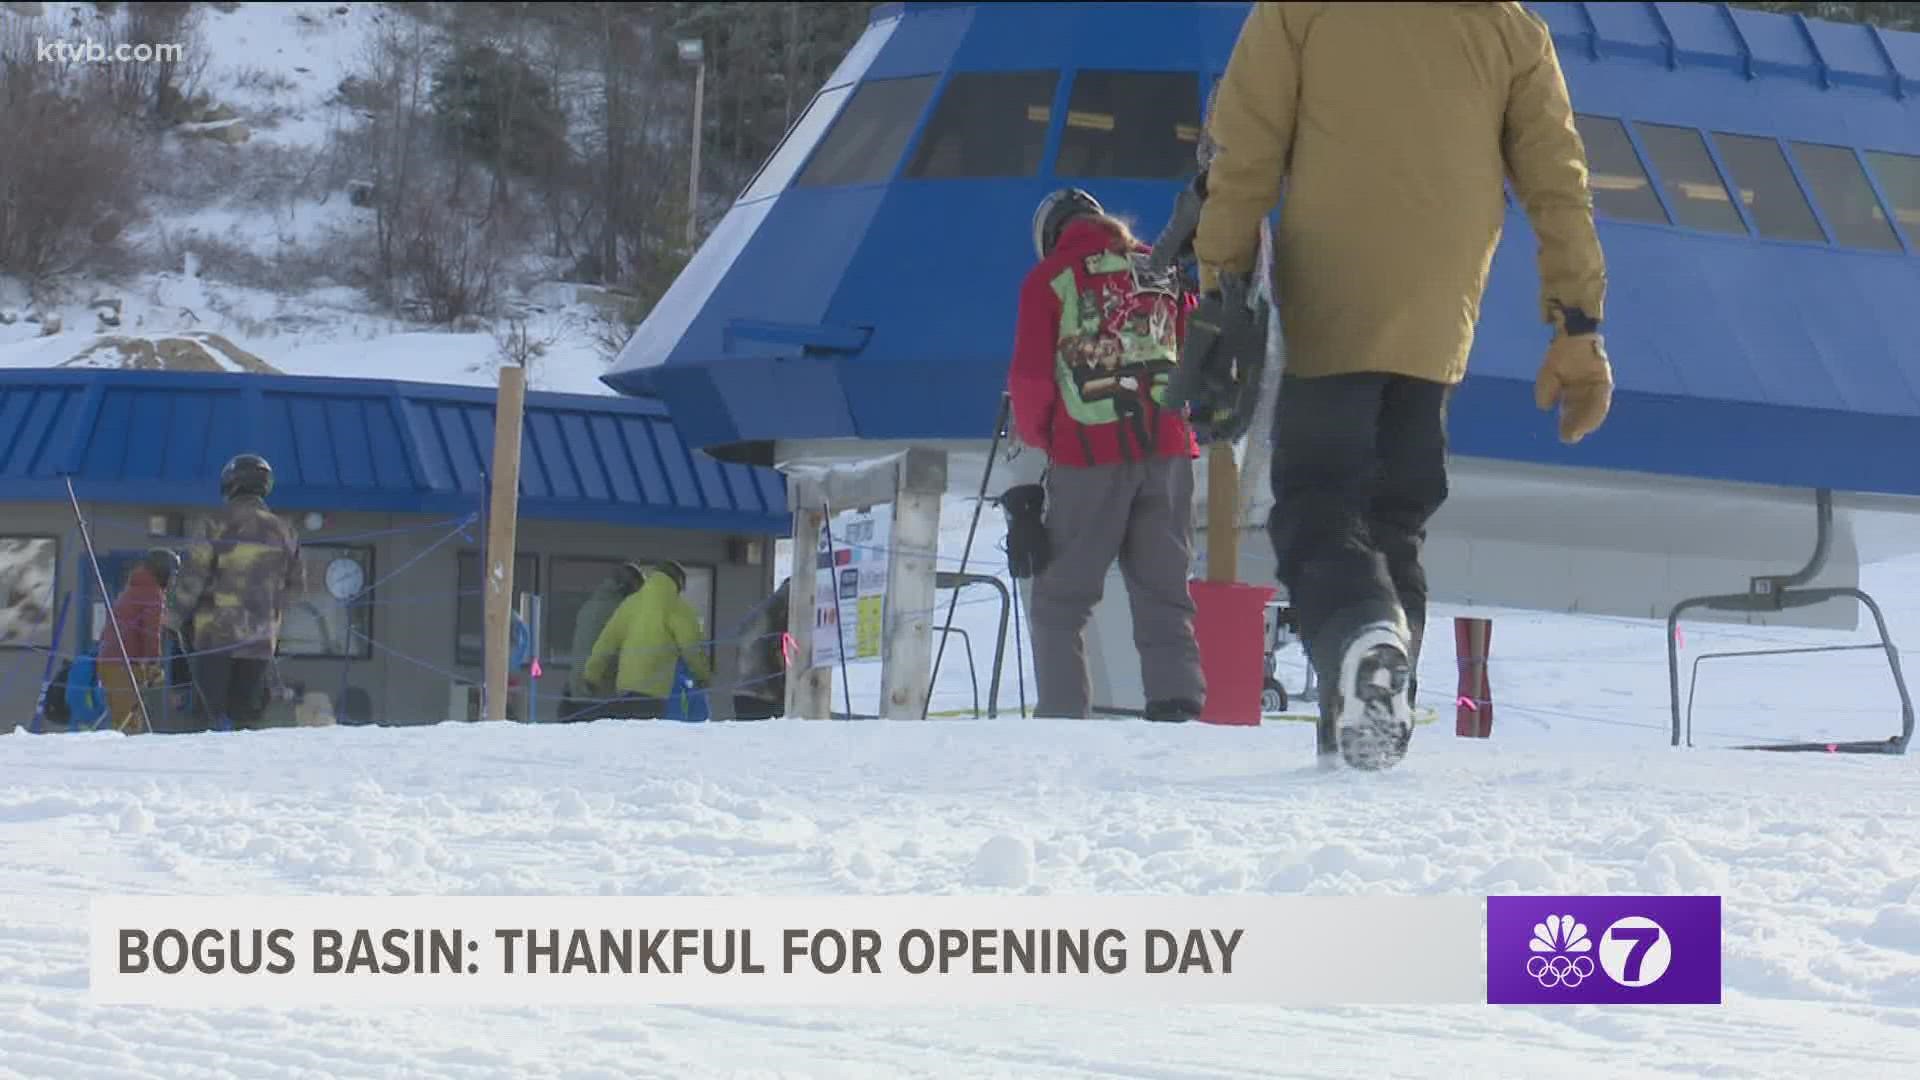 Thanksgiving marked Opening Day at Bogus Basin.